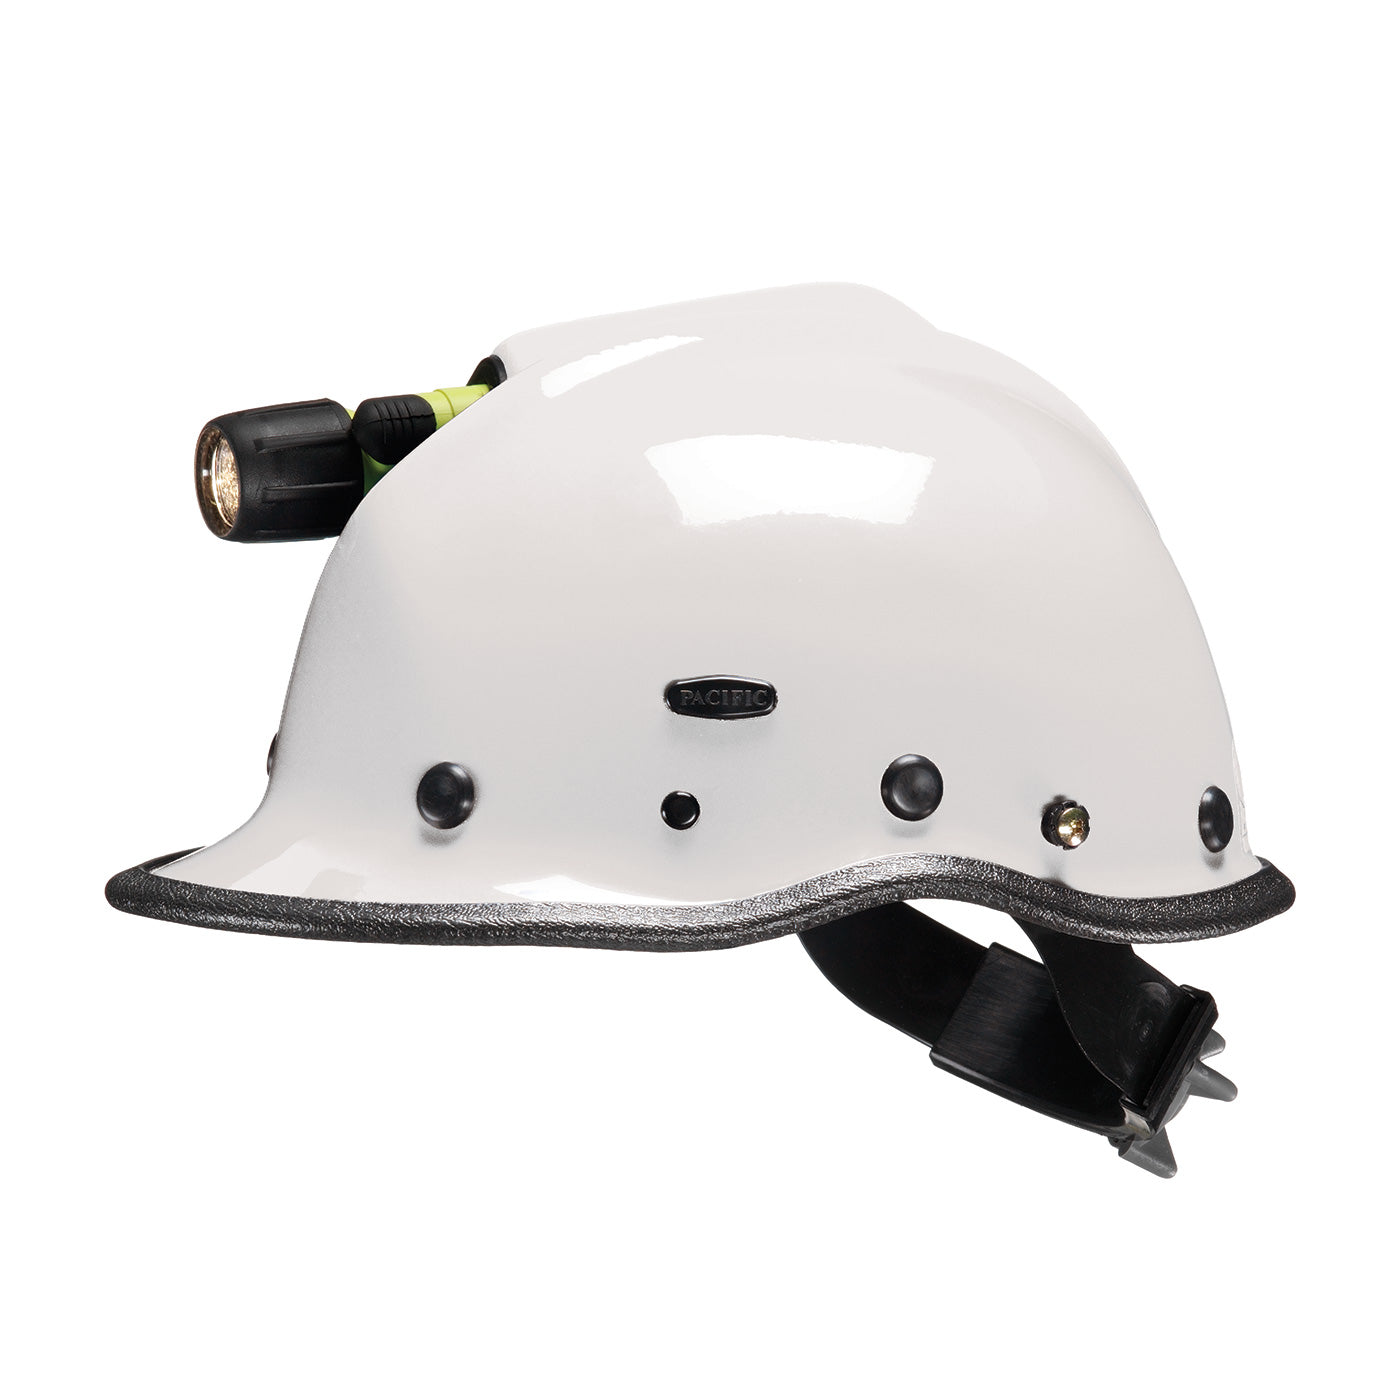 Pacific Helmets 860-6033 Rescue Helmet with ESS Goggle Mounts and Built-in Light Holder